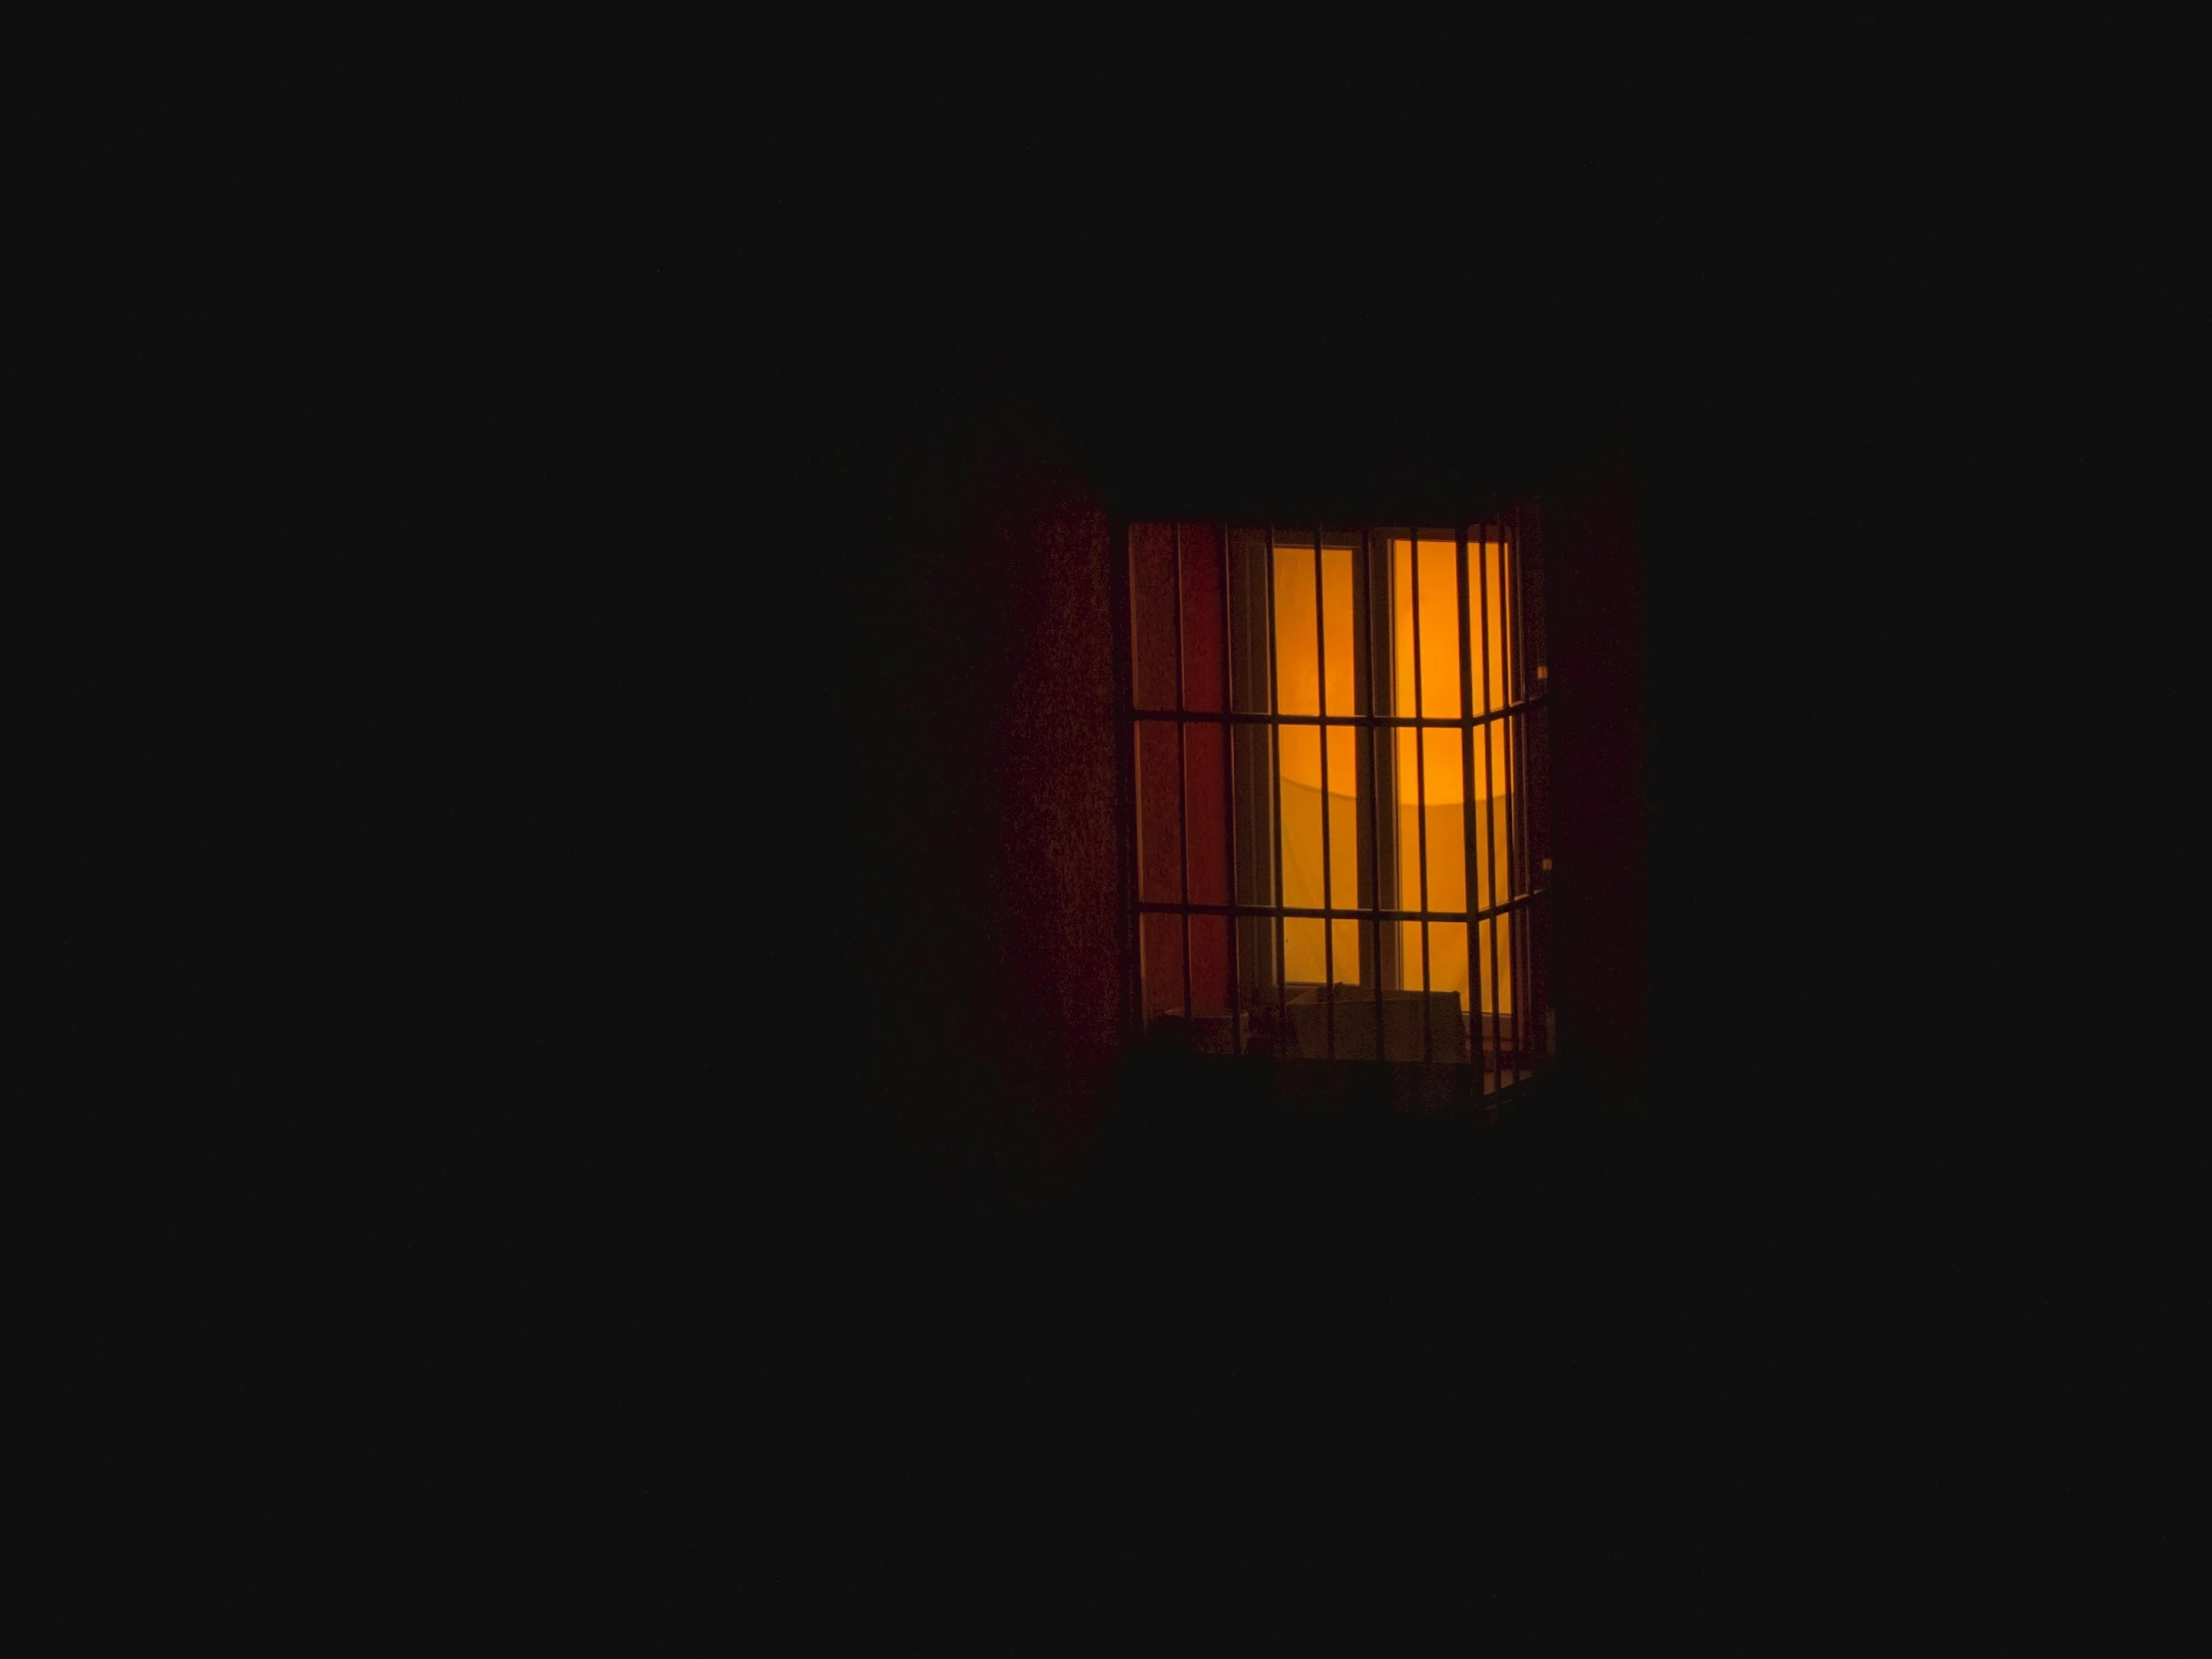 the silhouette of an open window at night